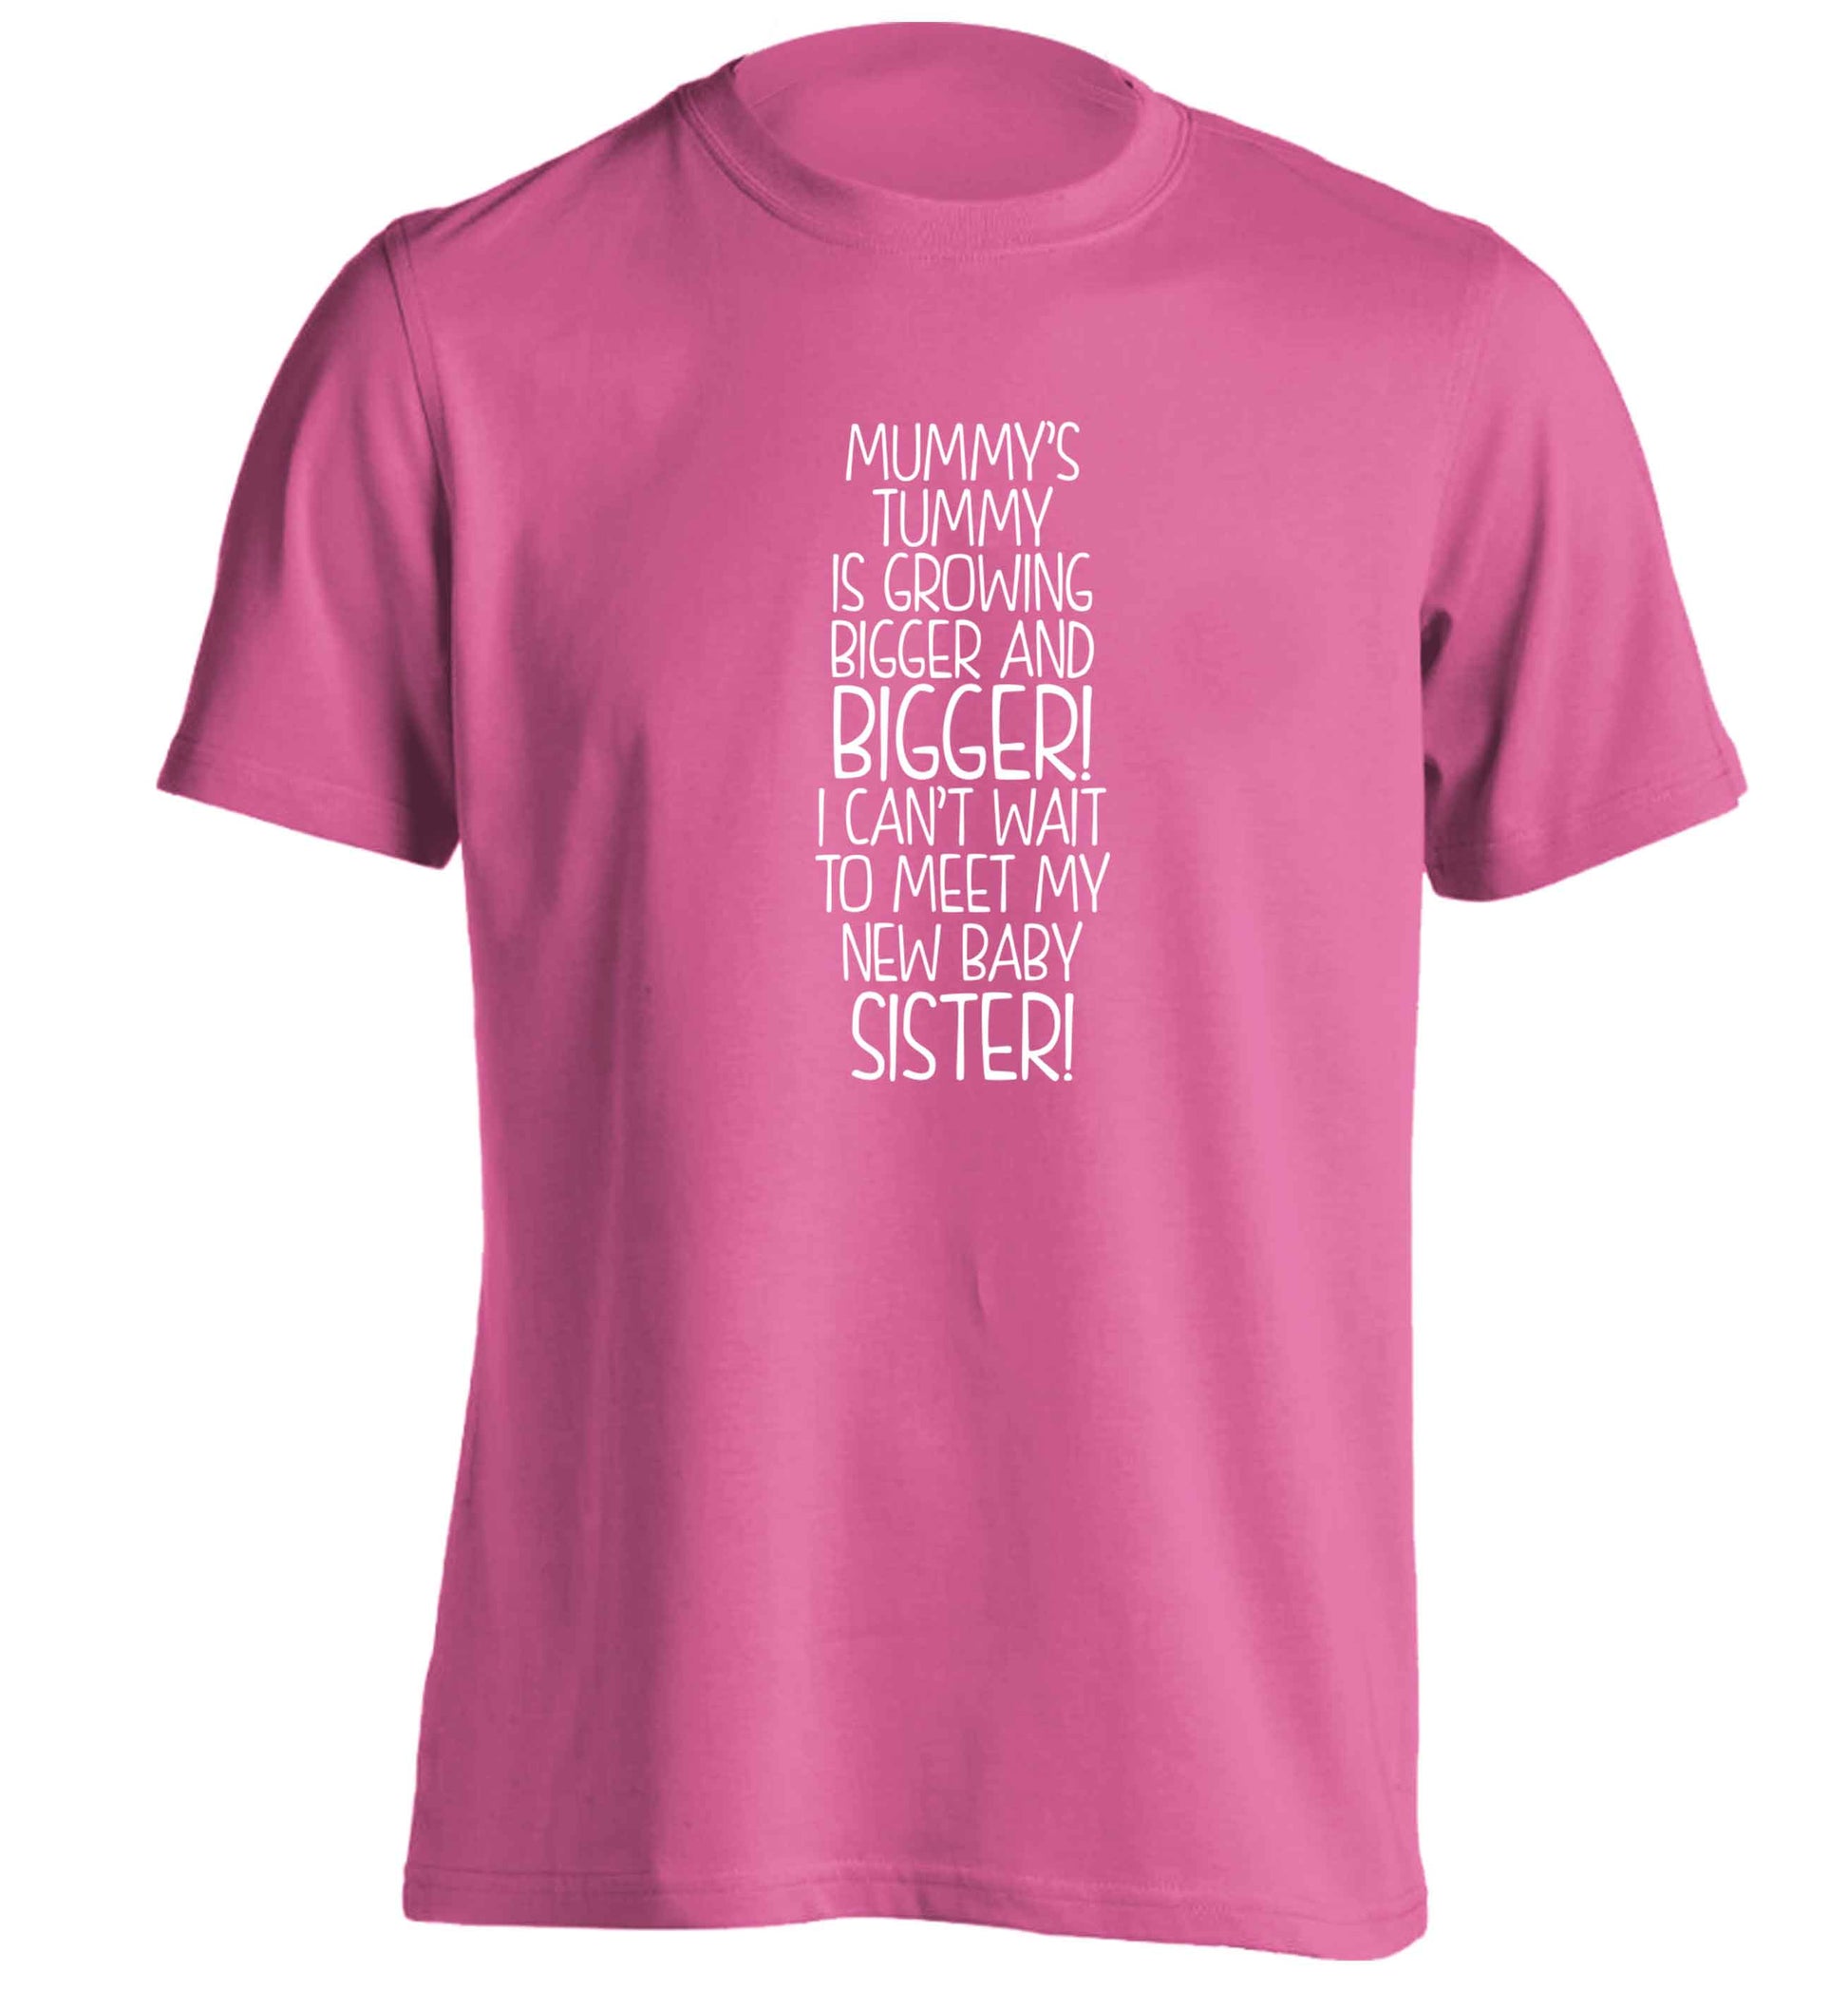 Mummy's tummy is growing bigger and bigger I can't wait to meet my new baby sister! adults unisex pink Tshirt 2XL